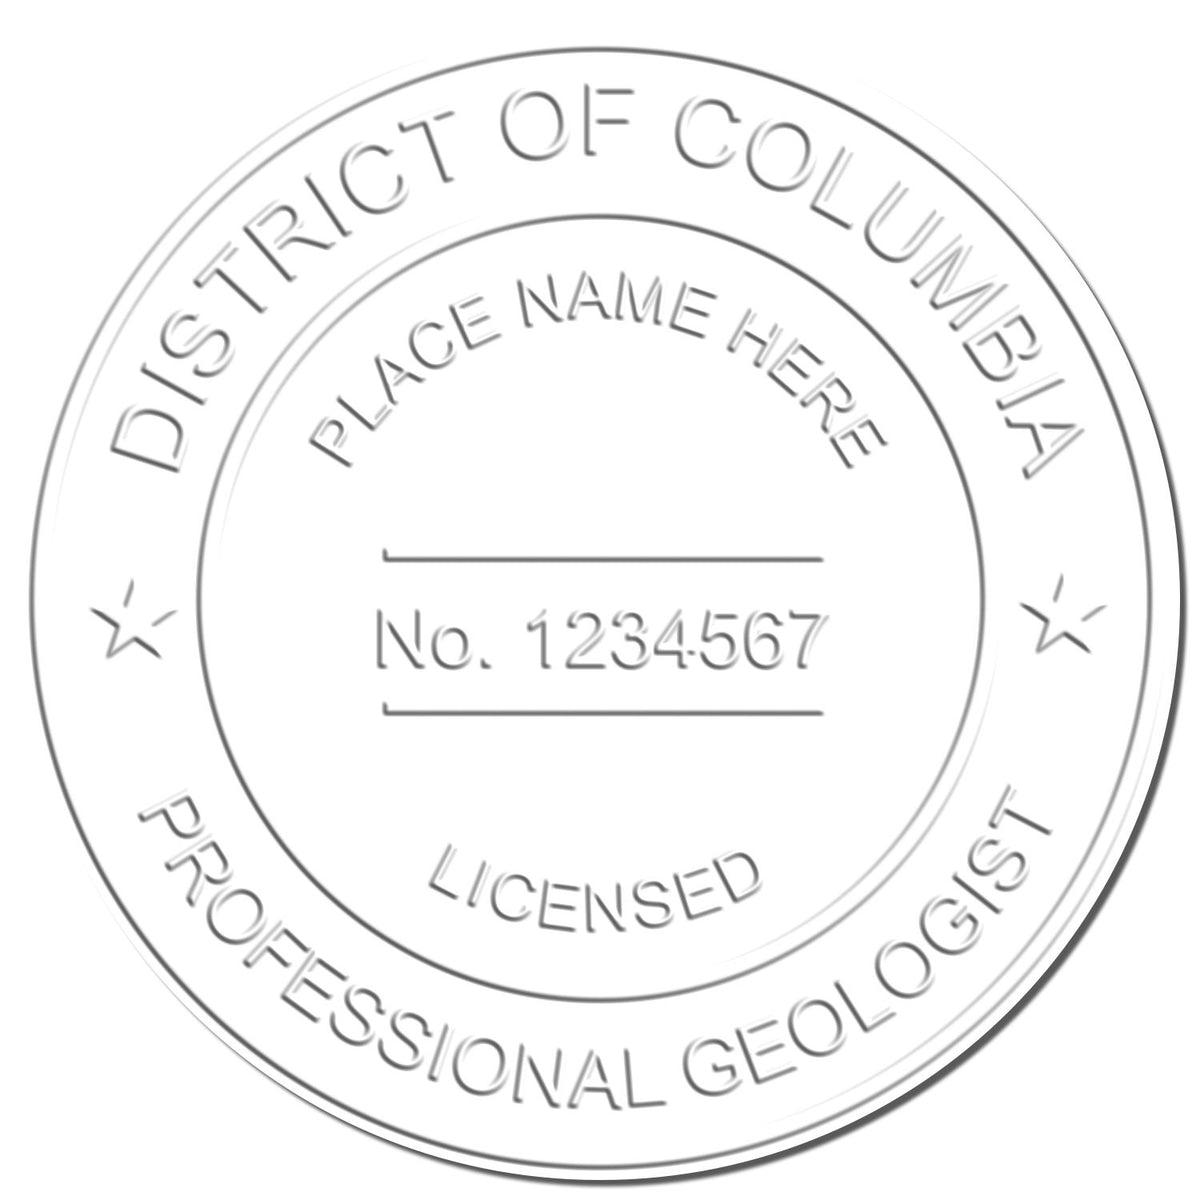 A photograph of the Hybrid District of Columbia Geologist Seal stamp impression reveals a vivid, professional image of the on paper.